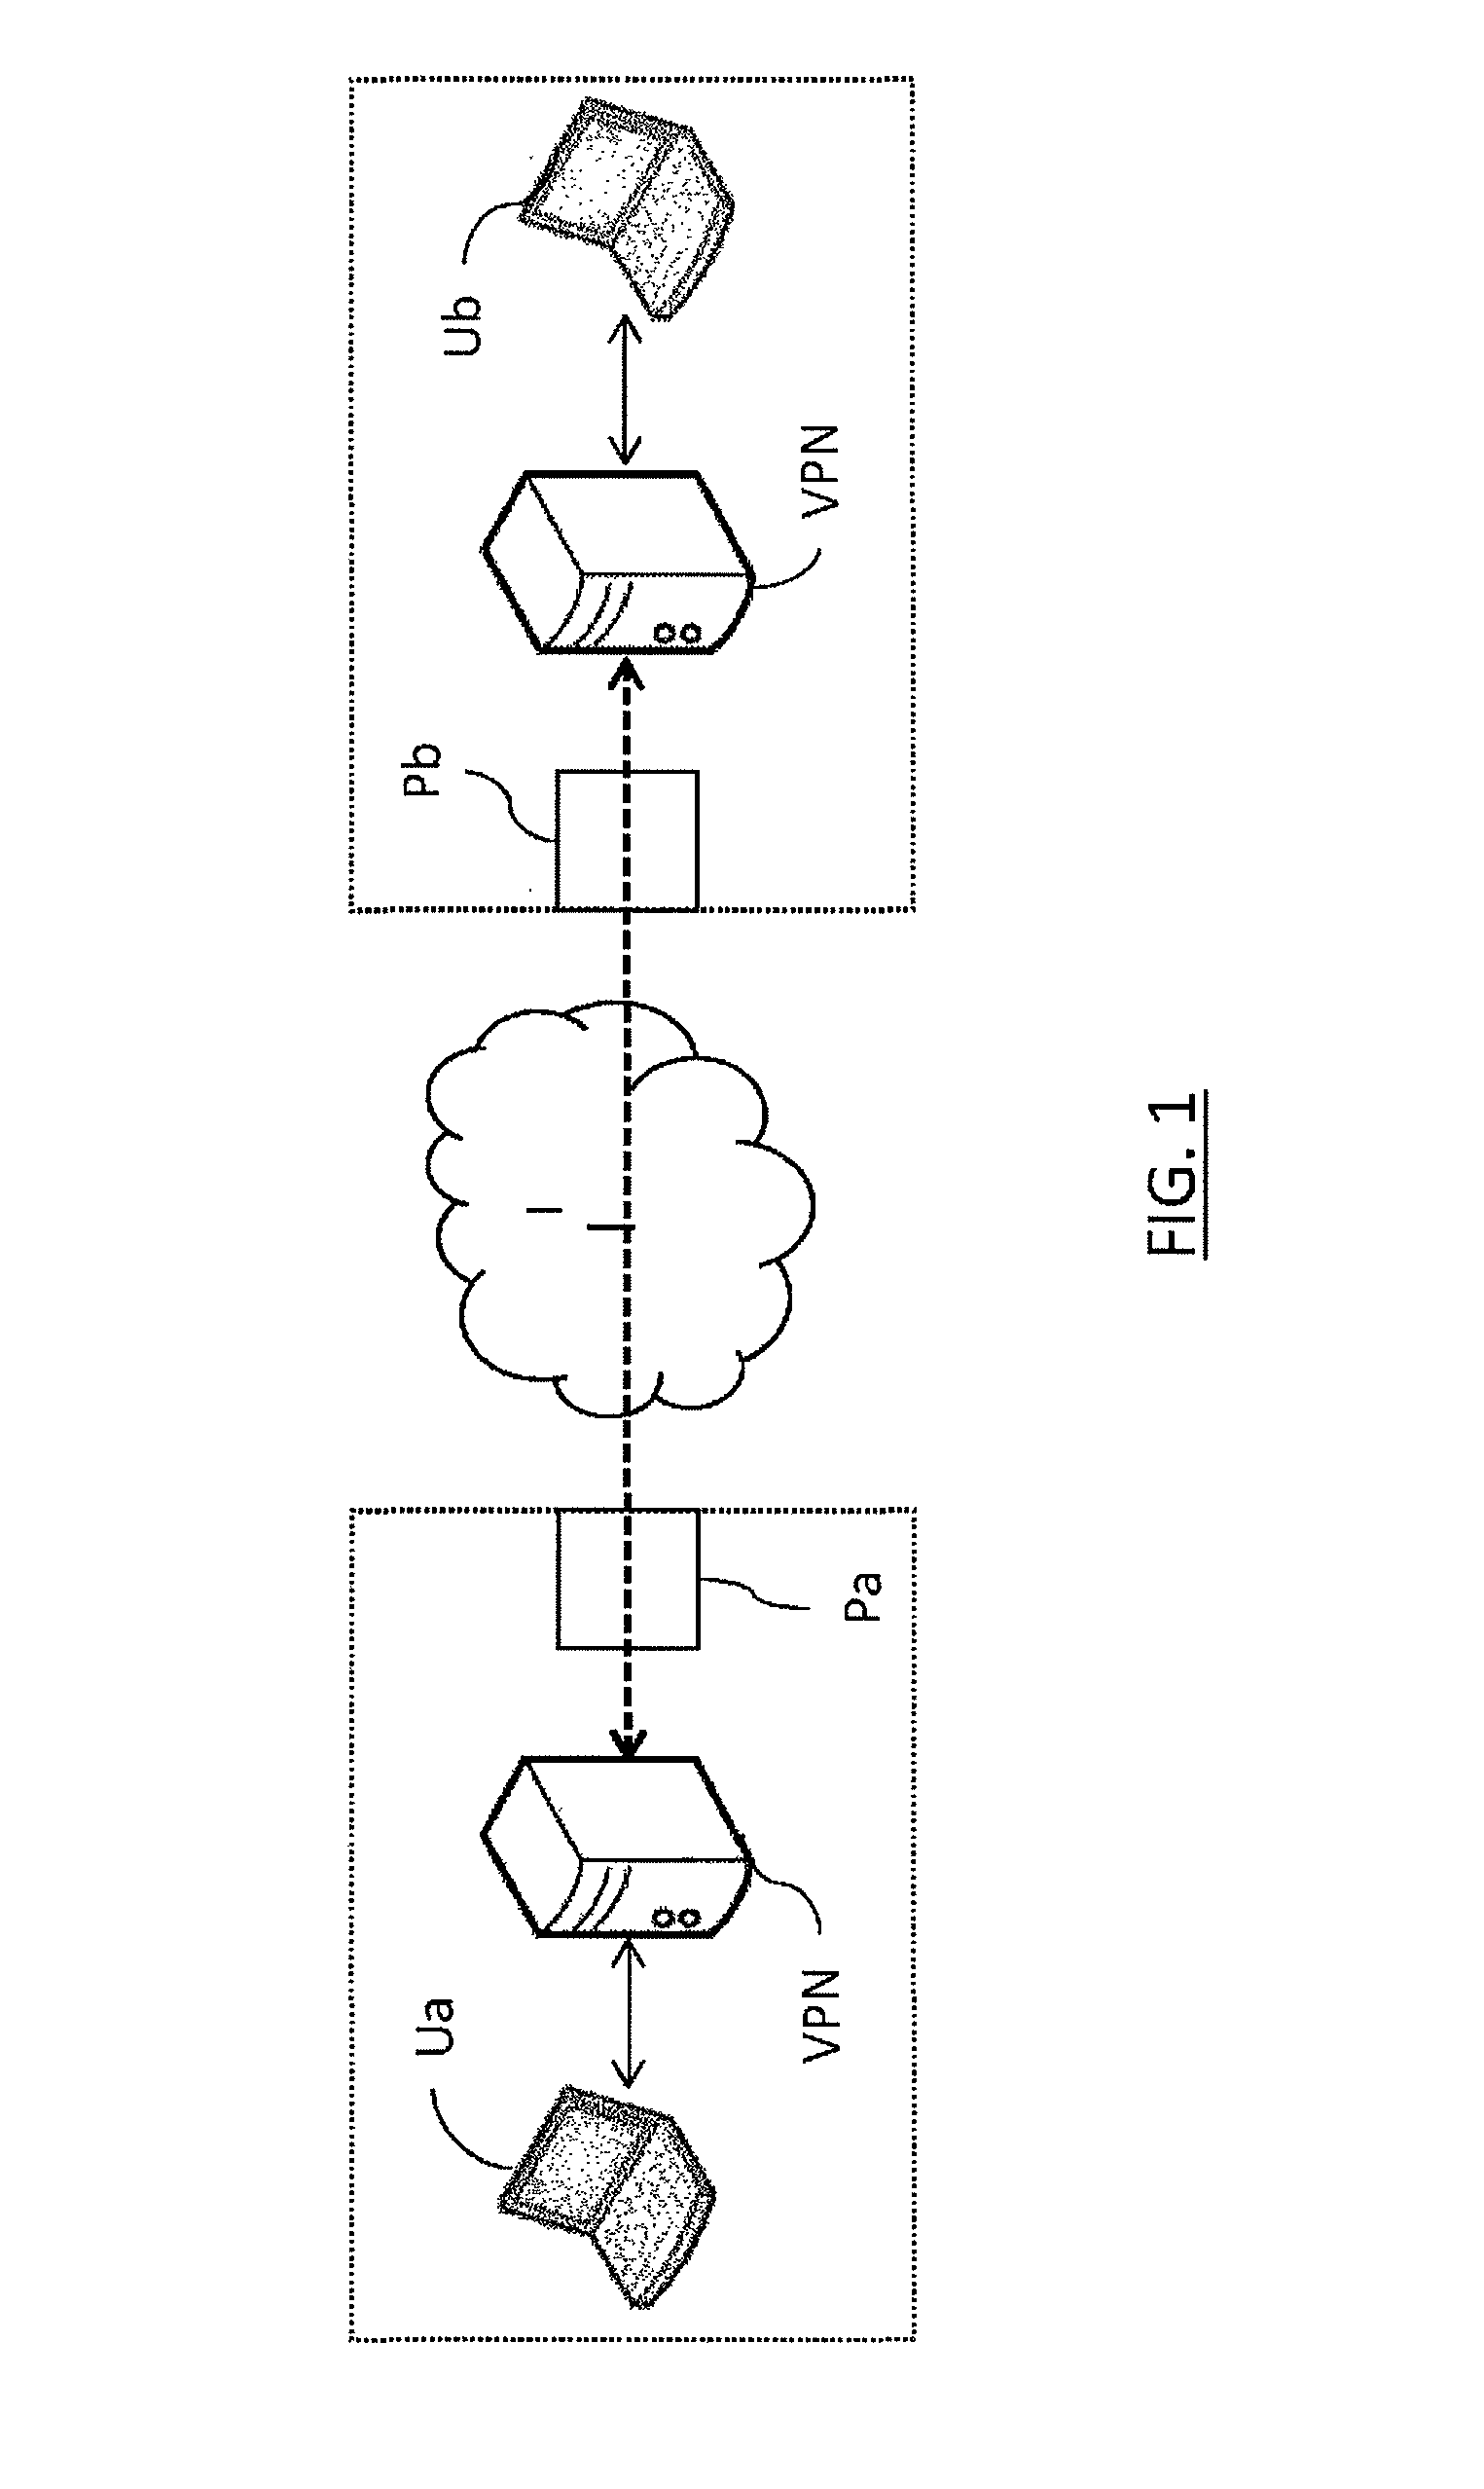 Method and system for establishing virtual private networks between local area networks